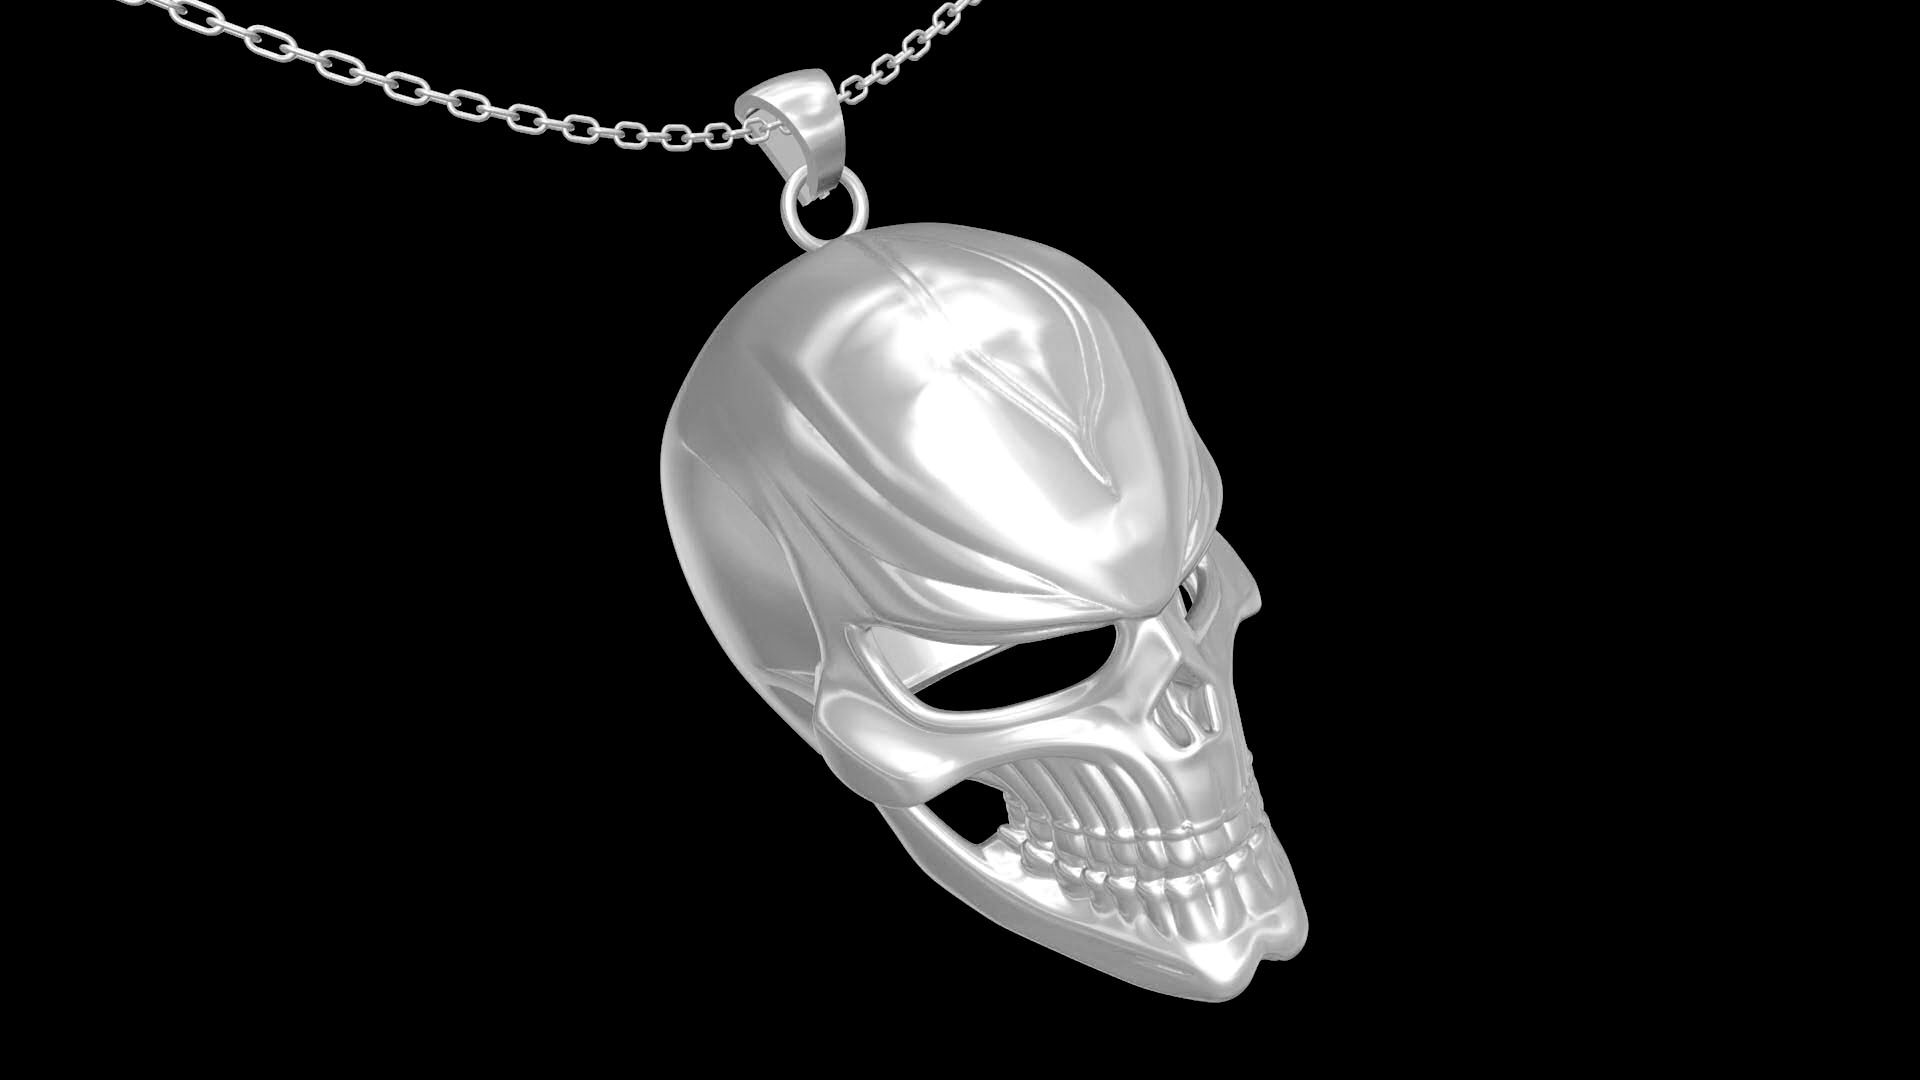 Ghost Rider Helmet pendant jewelry gold necklace